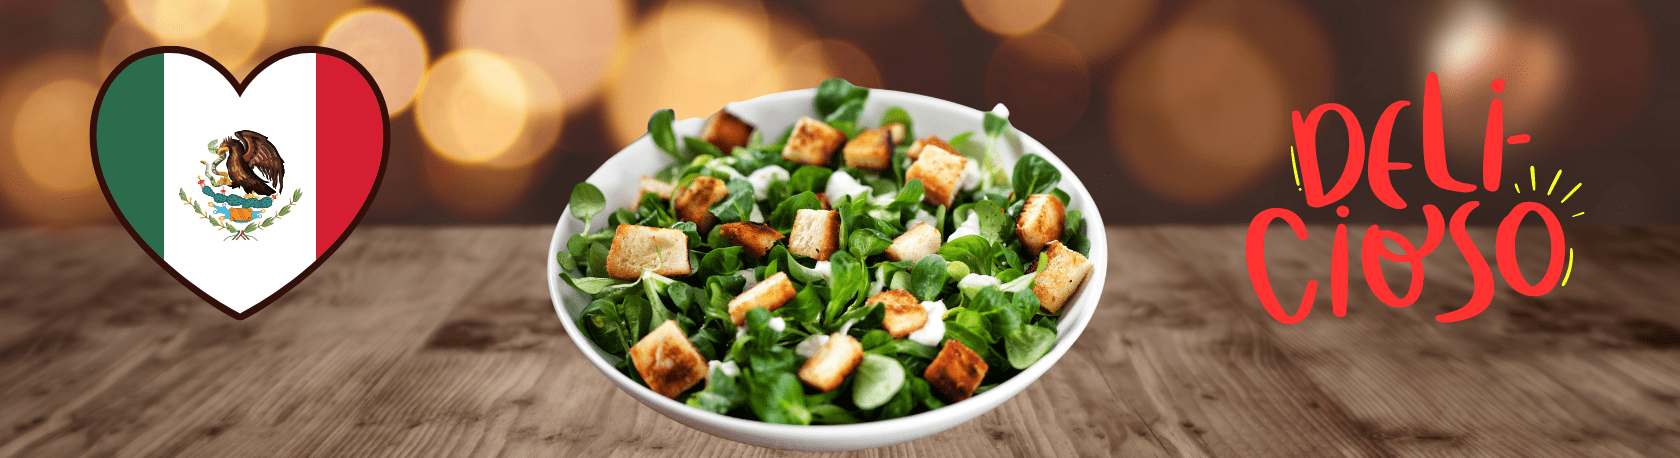 Brush up your Spanish vocabulary & learn about the Mexican origins of Caesar salad